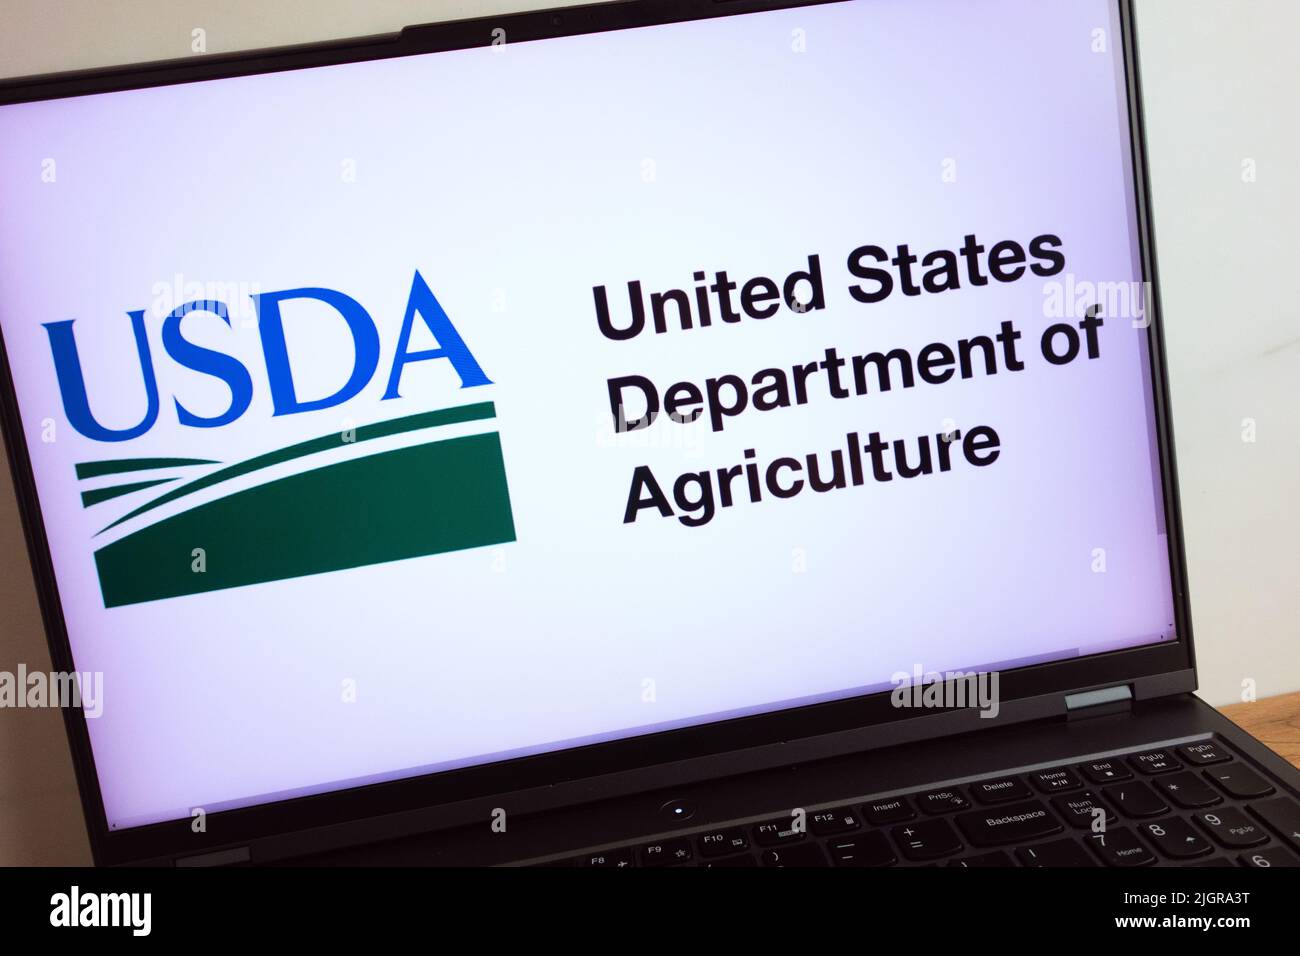 KONSKIE, POLAND - July 11, 2022: United States Department of Agriculture USDA logo displayed on laptop computer screen Stock Photo